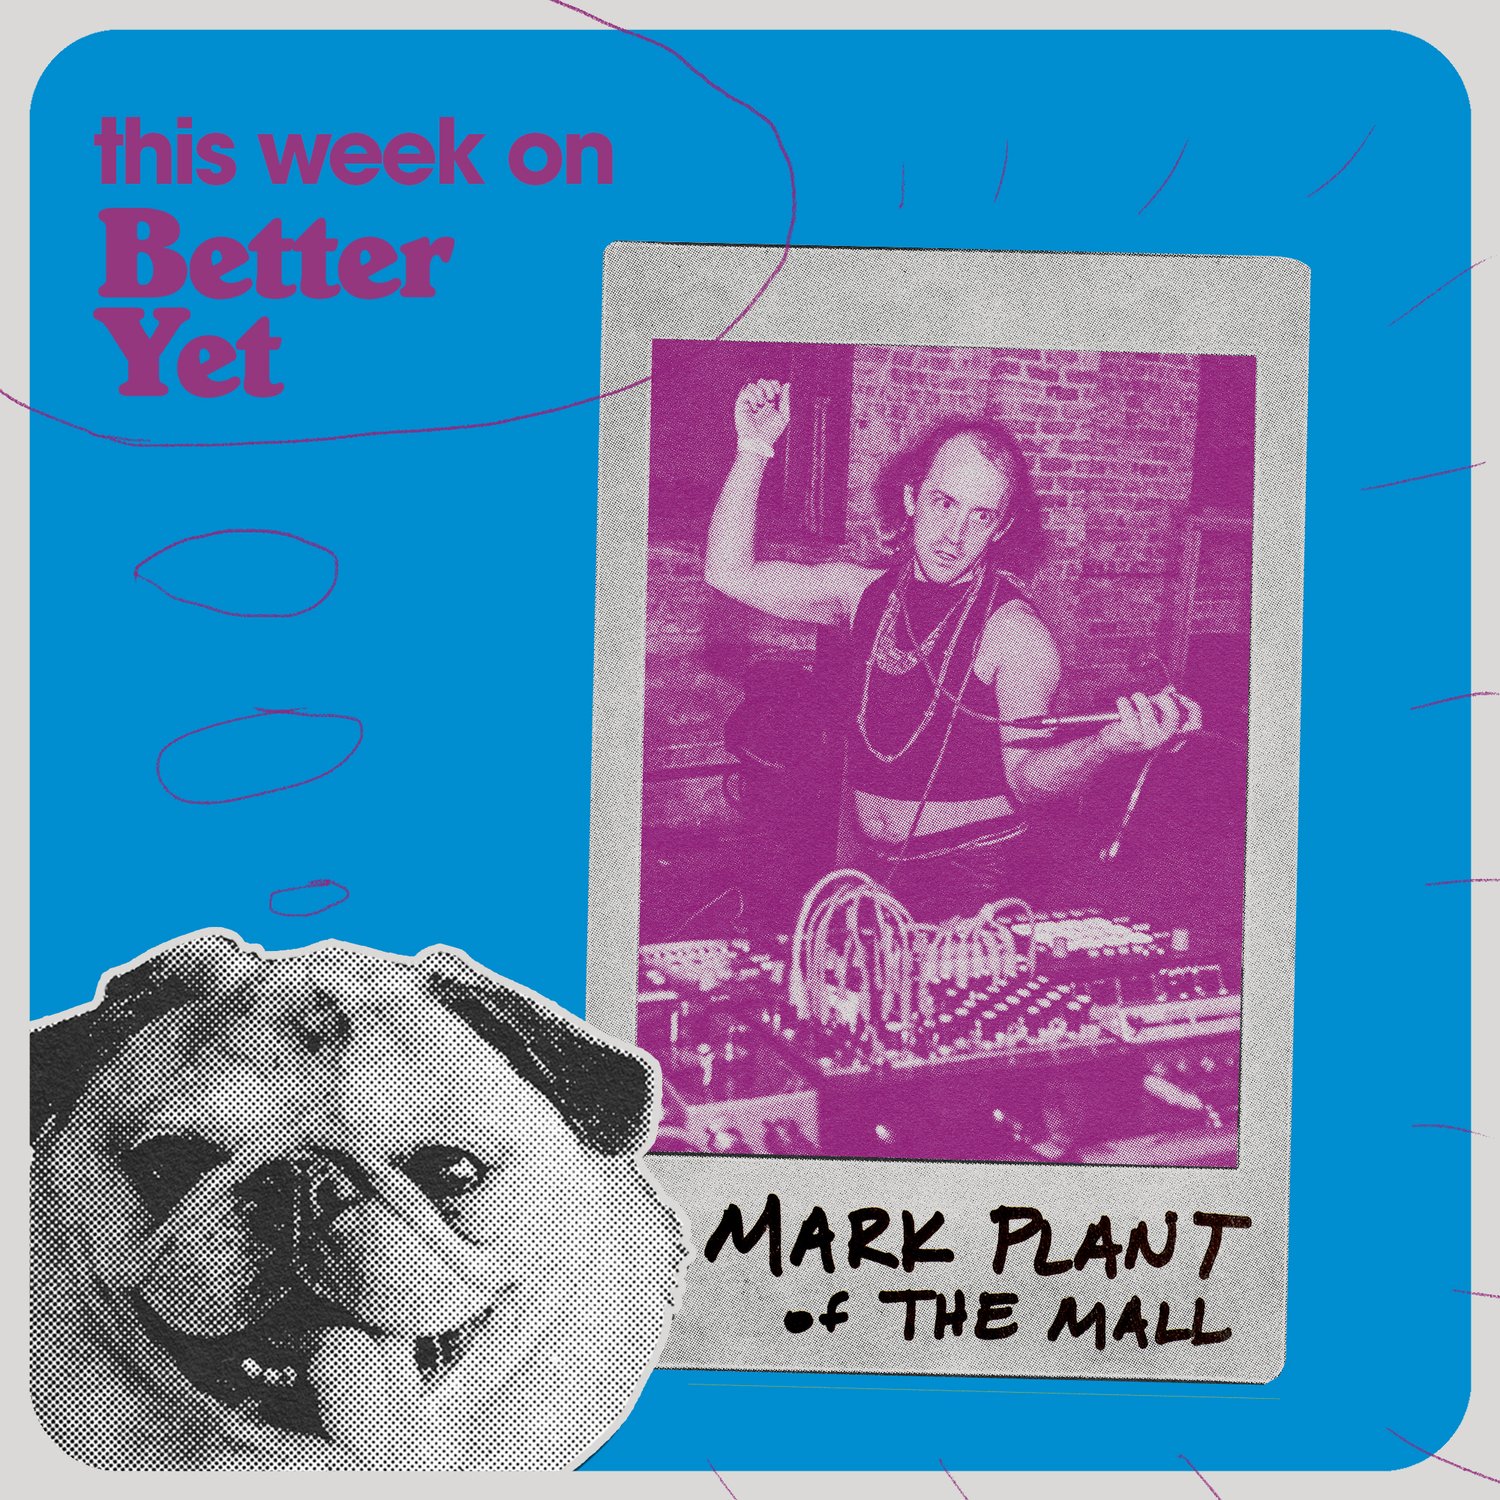 MARK PLANT of THE MALL!